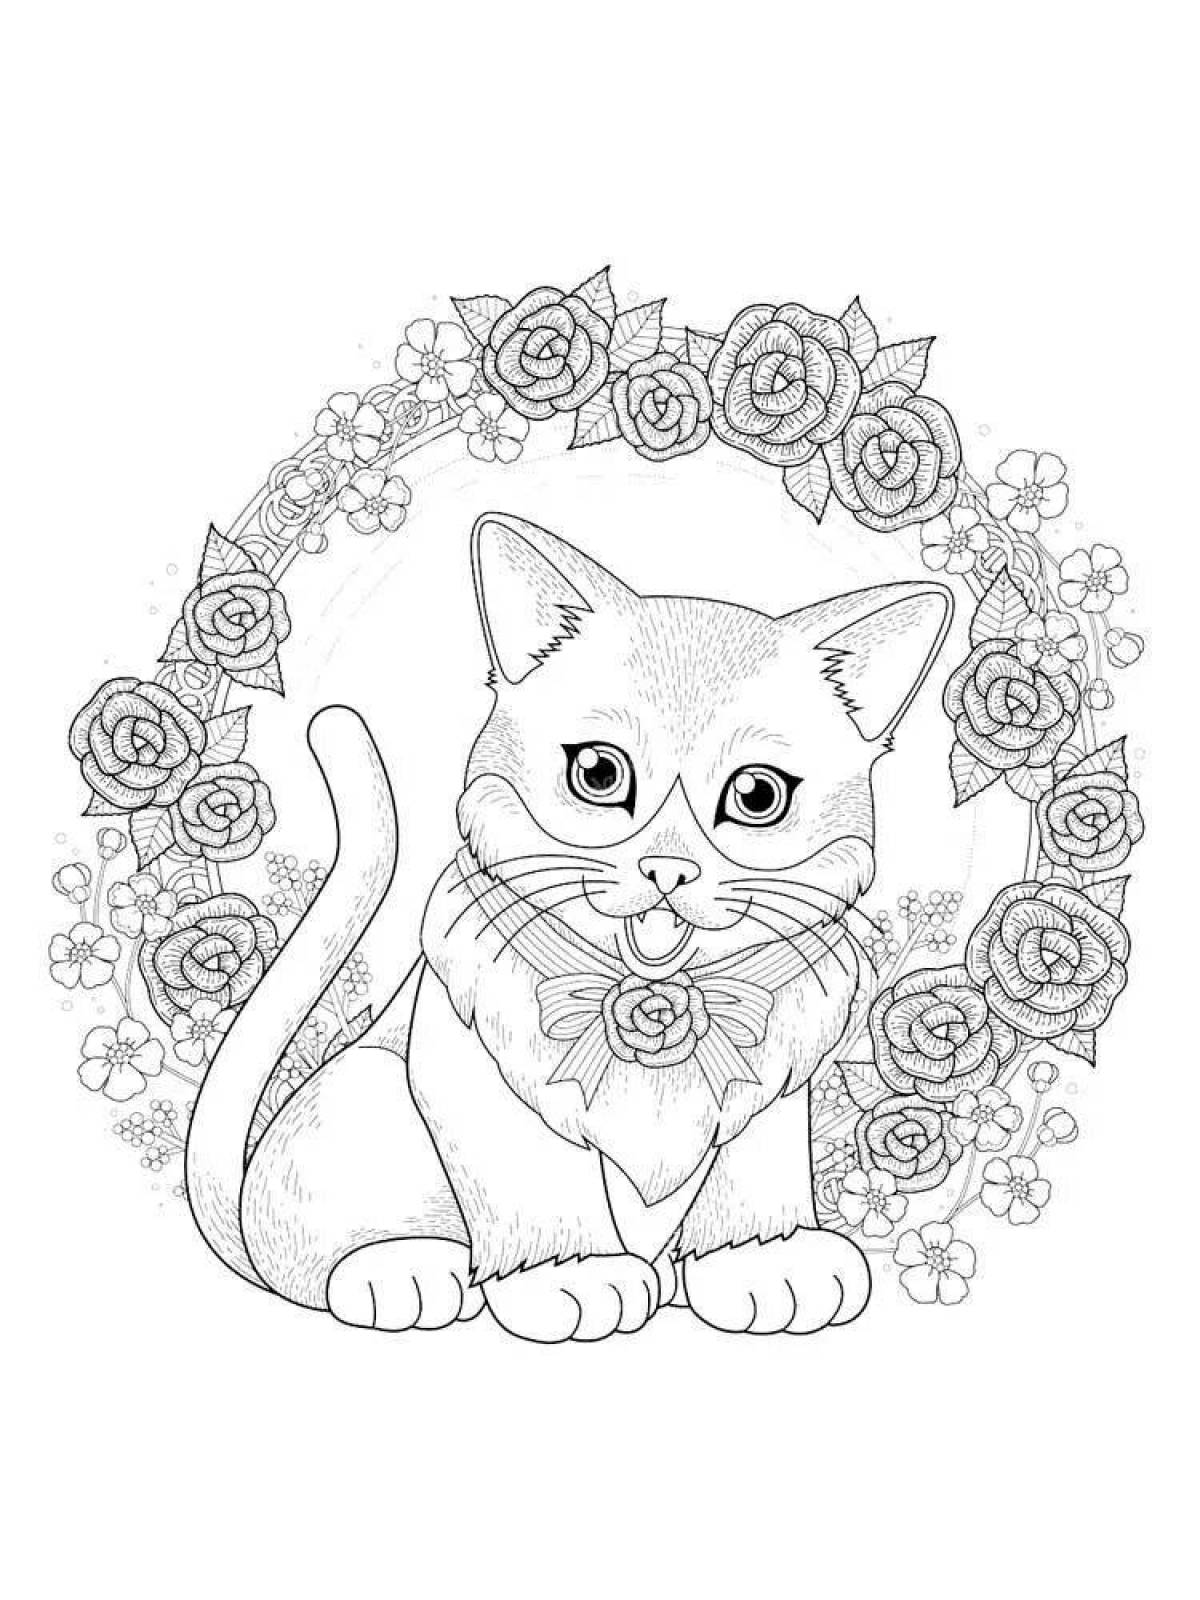 Great coloring for girls 12 years old - cats